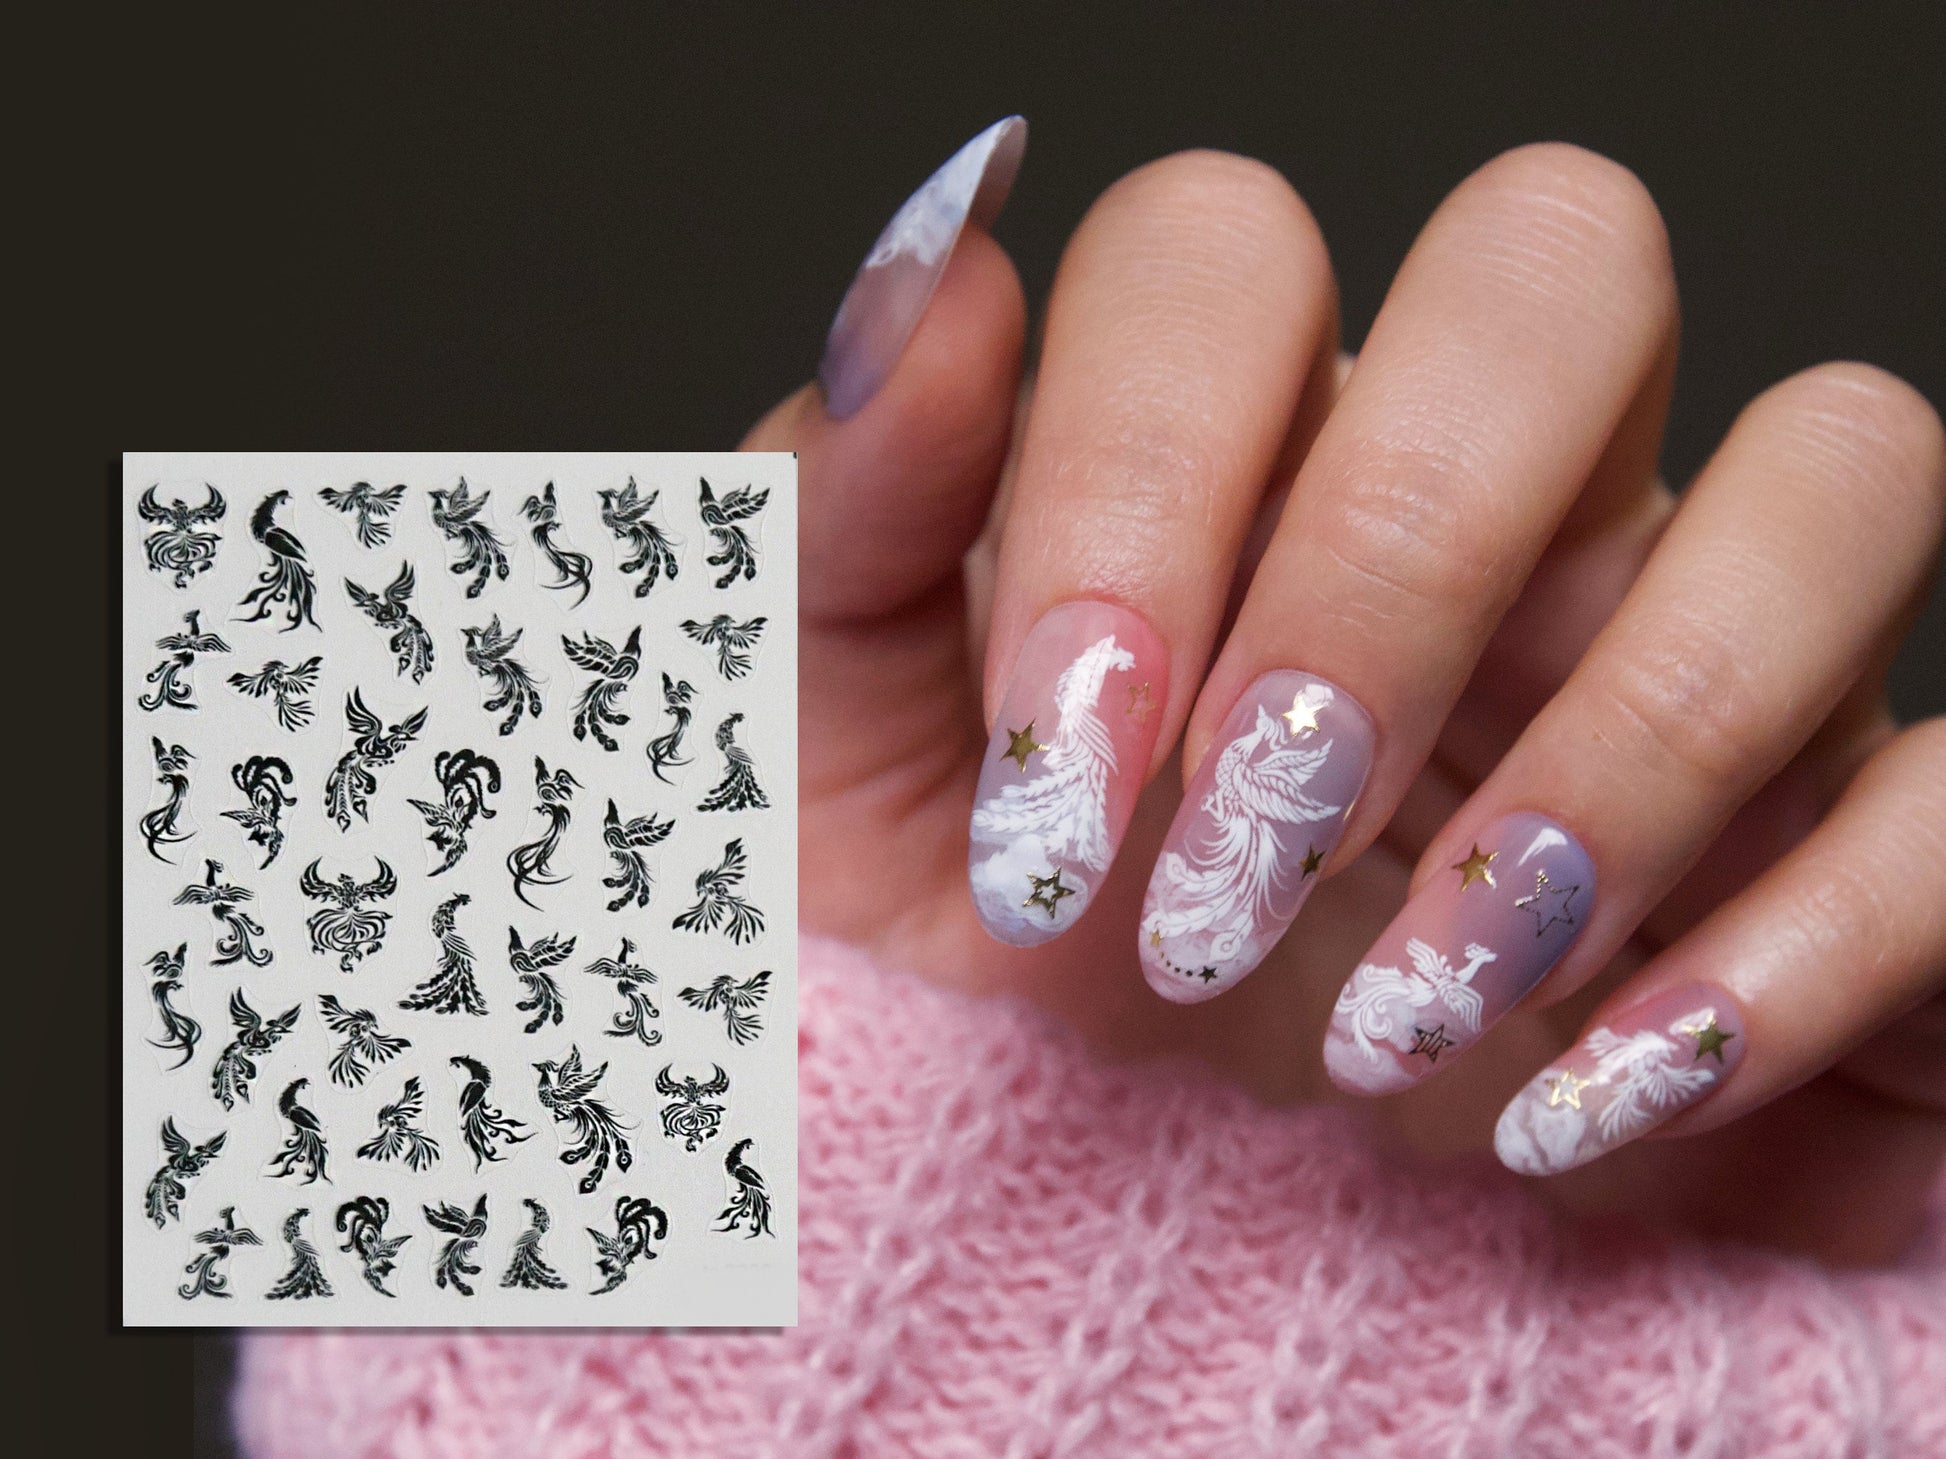 Nail Art Stickers Laser Silver  Silver Star Stickers Manicure